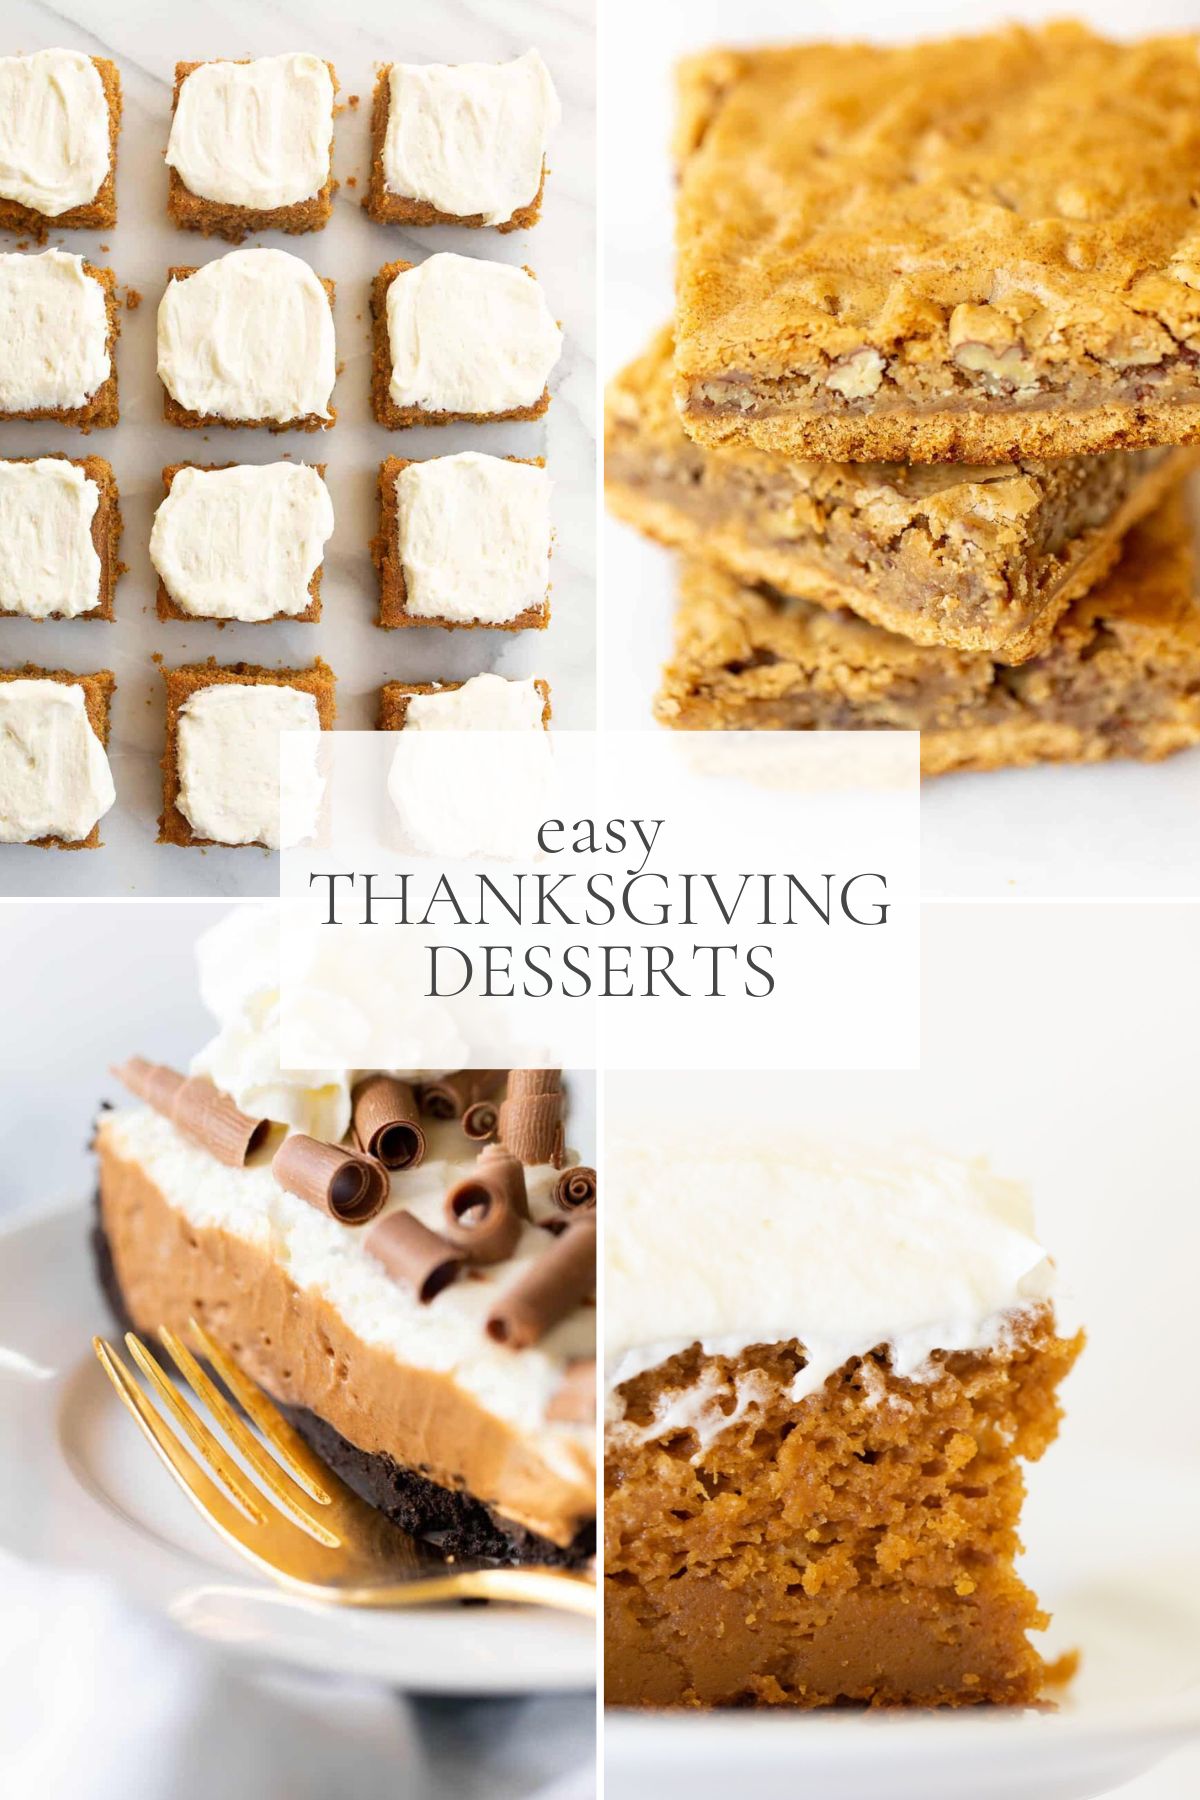 A graphic image featuring a variety of Thanksgiving desserts.